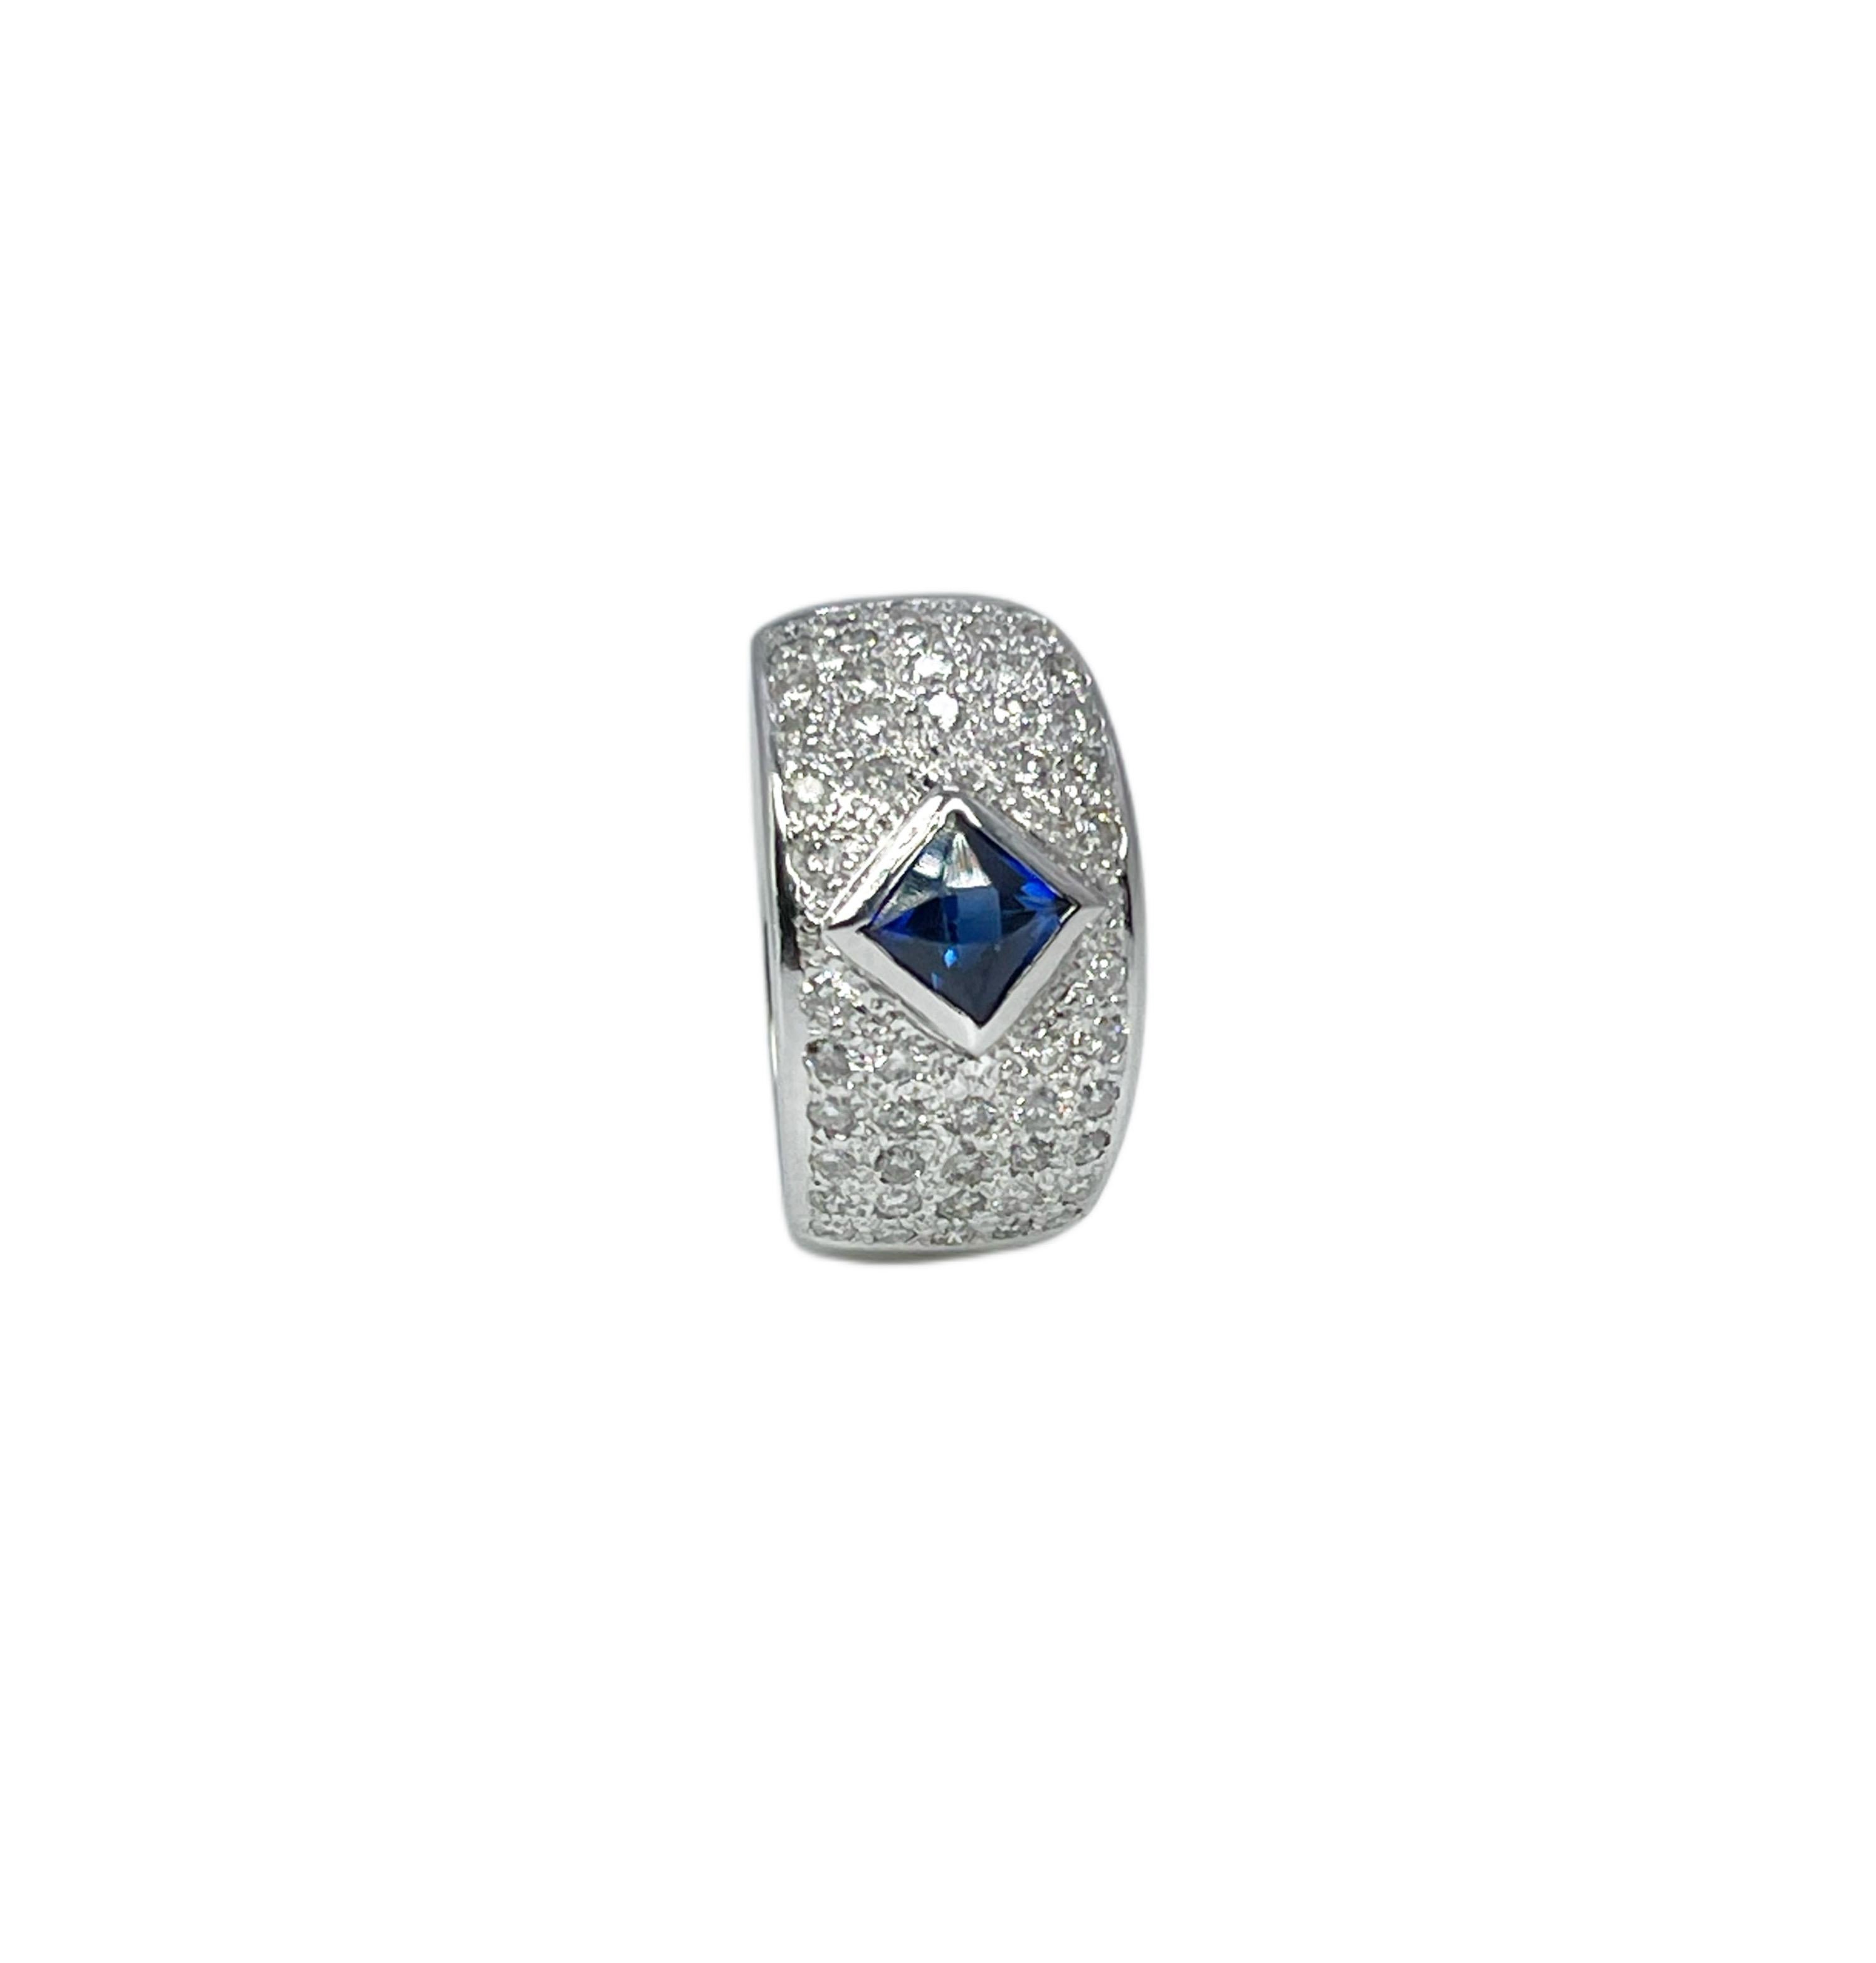 Sapphire & Diamond cocktail ring in 18KT white gold In New Condition For Sale In Jupiter, FL